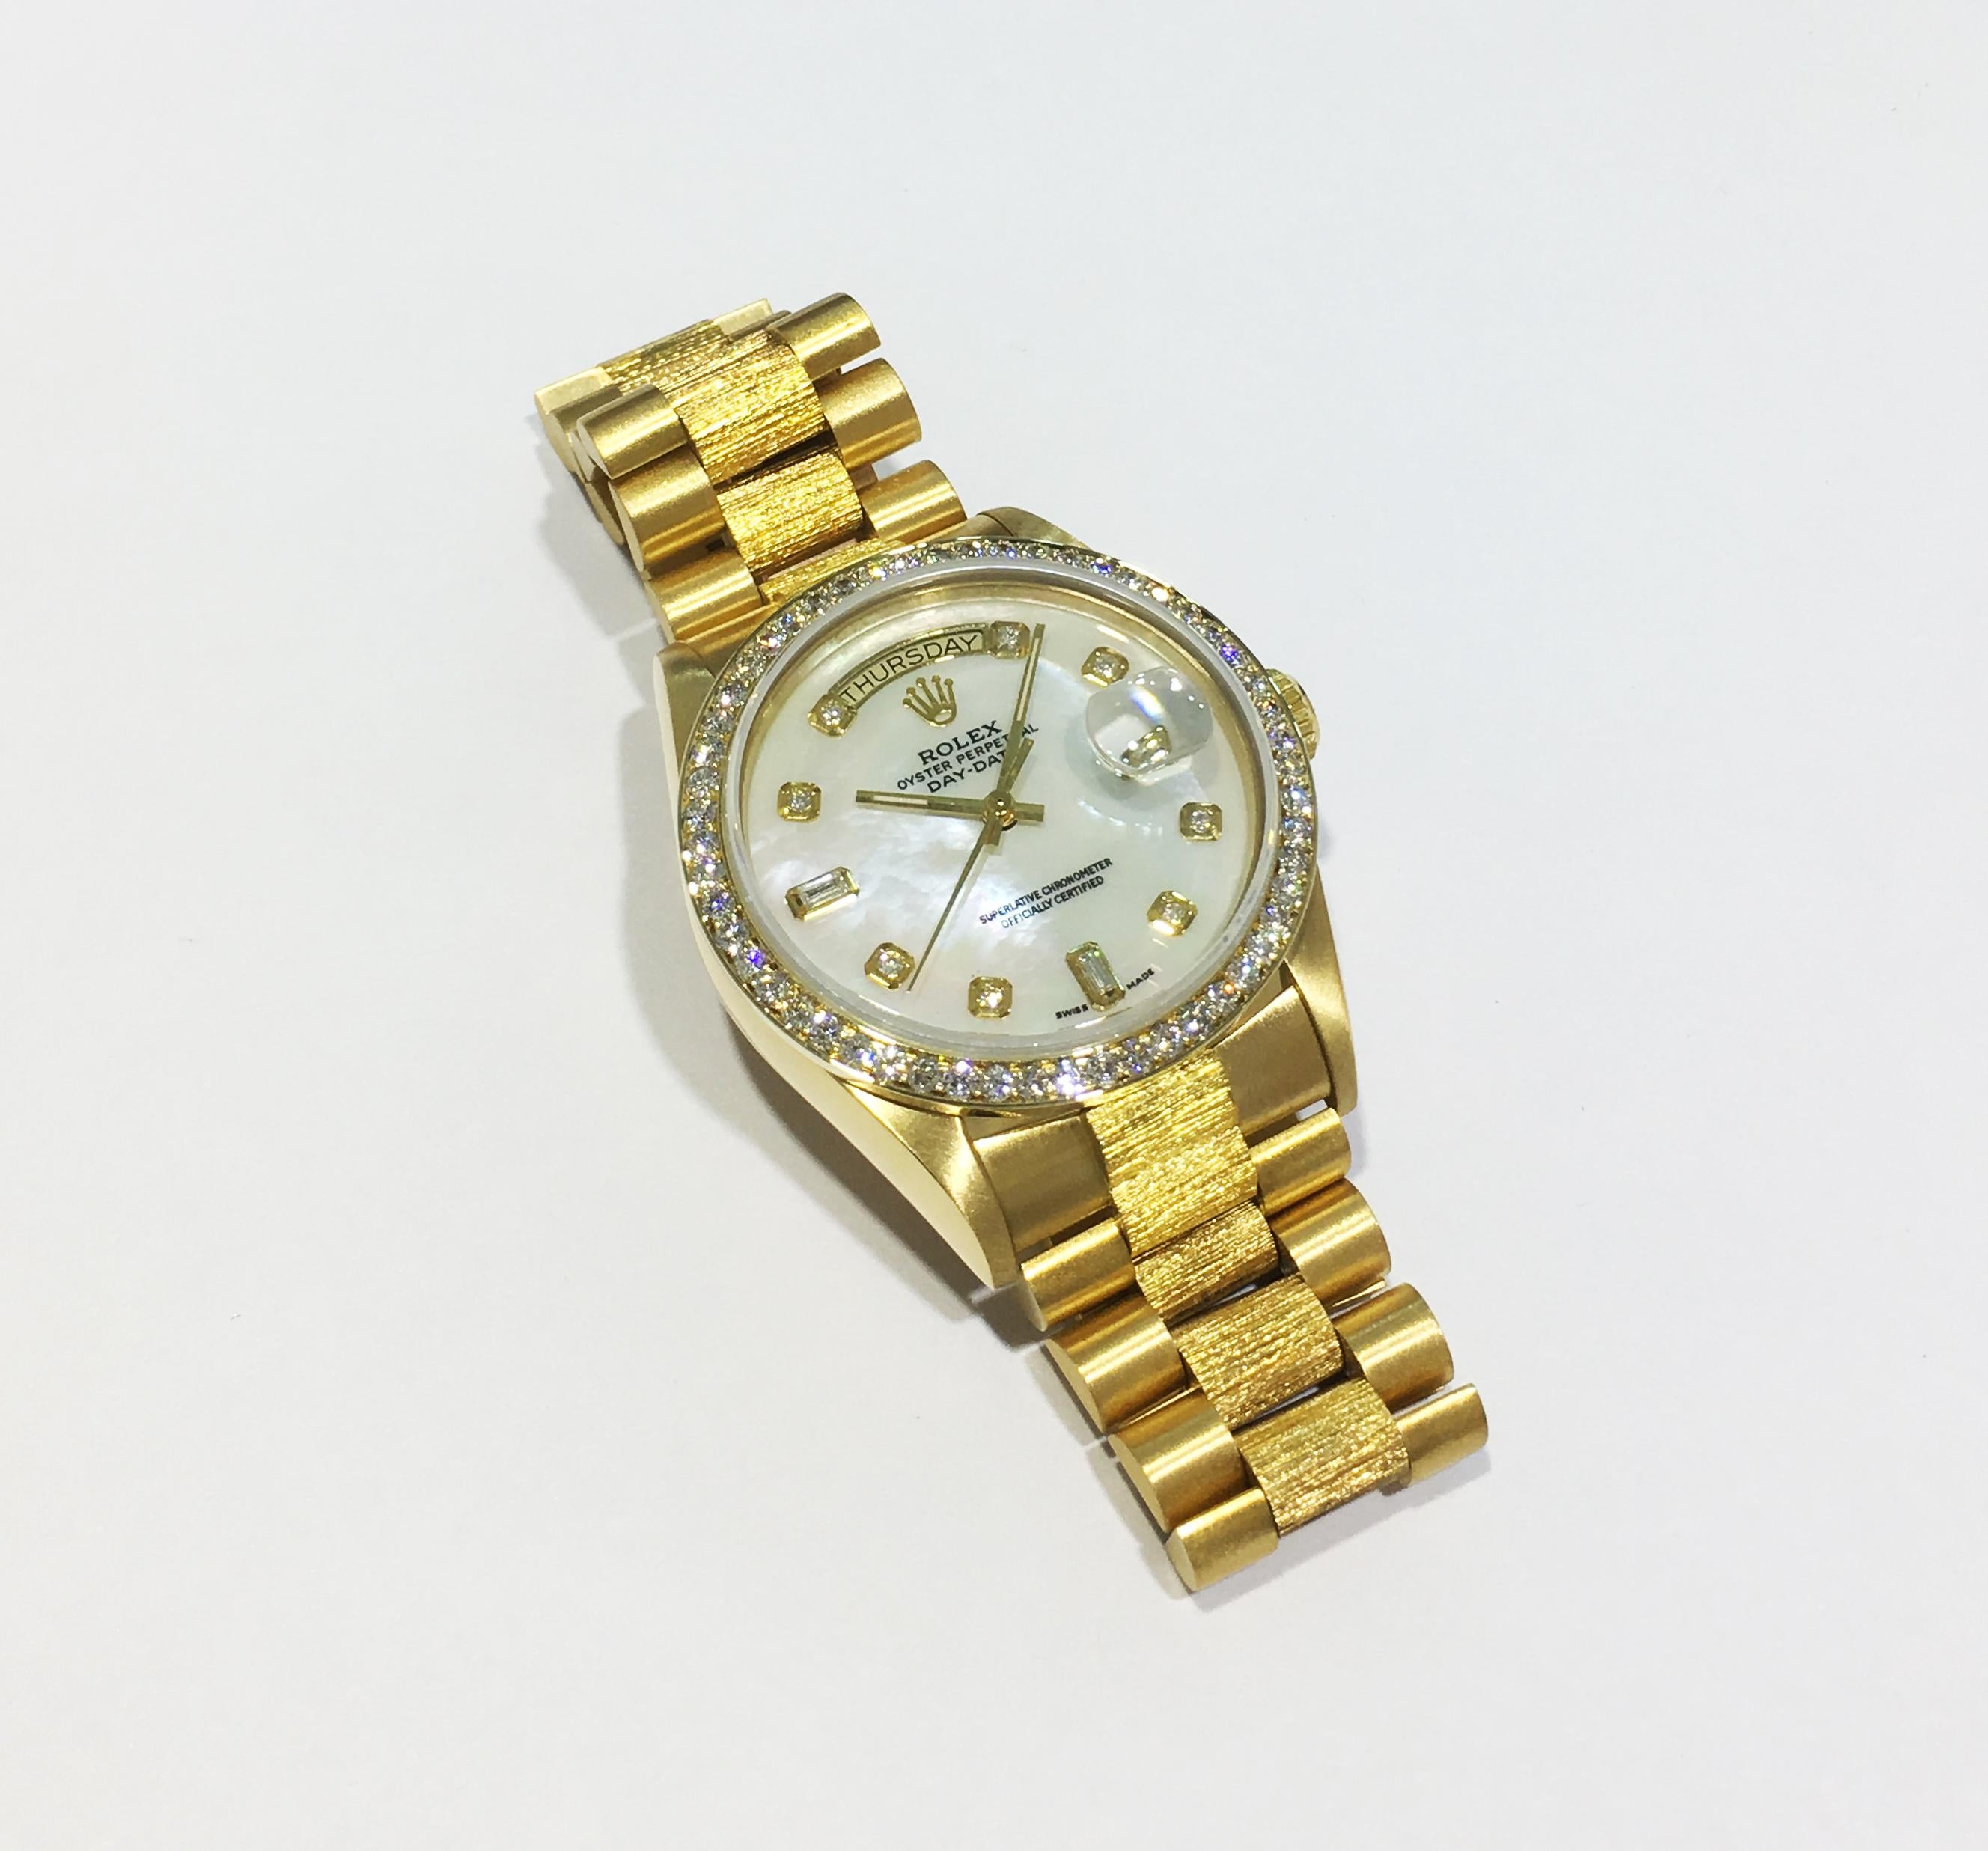 -Movement: Swiss Automatic
-Case Material: Solid 18k Yellow Gold
-Case Size: 36mm
-Bezel: Custom Aftermarket Diamond Bezel VS-G 2.0ct.
-Dial: Mother of Pearl Diamond Dial
-Bracelet: Solid 18k Yellow Gold Presidential Bark Edition
-Clasp: Solid 18k